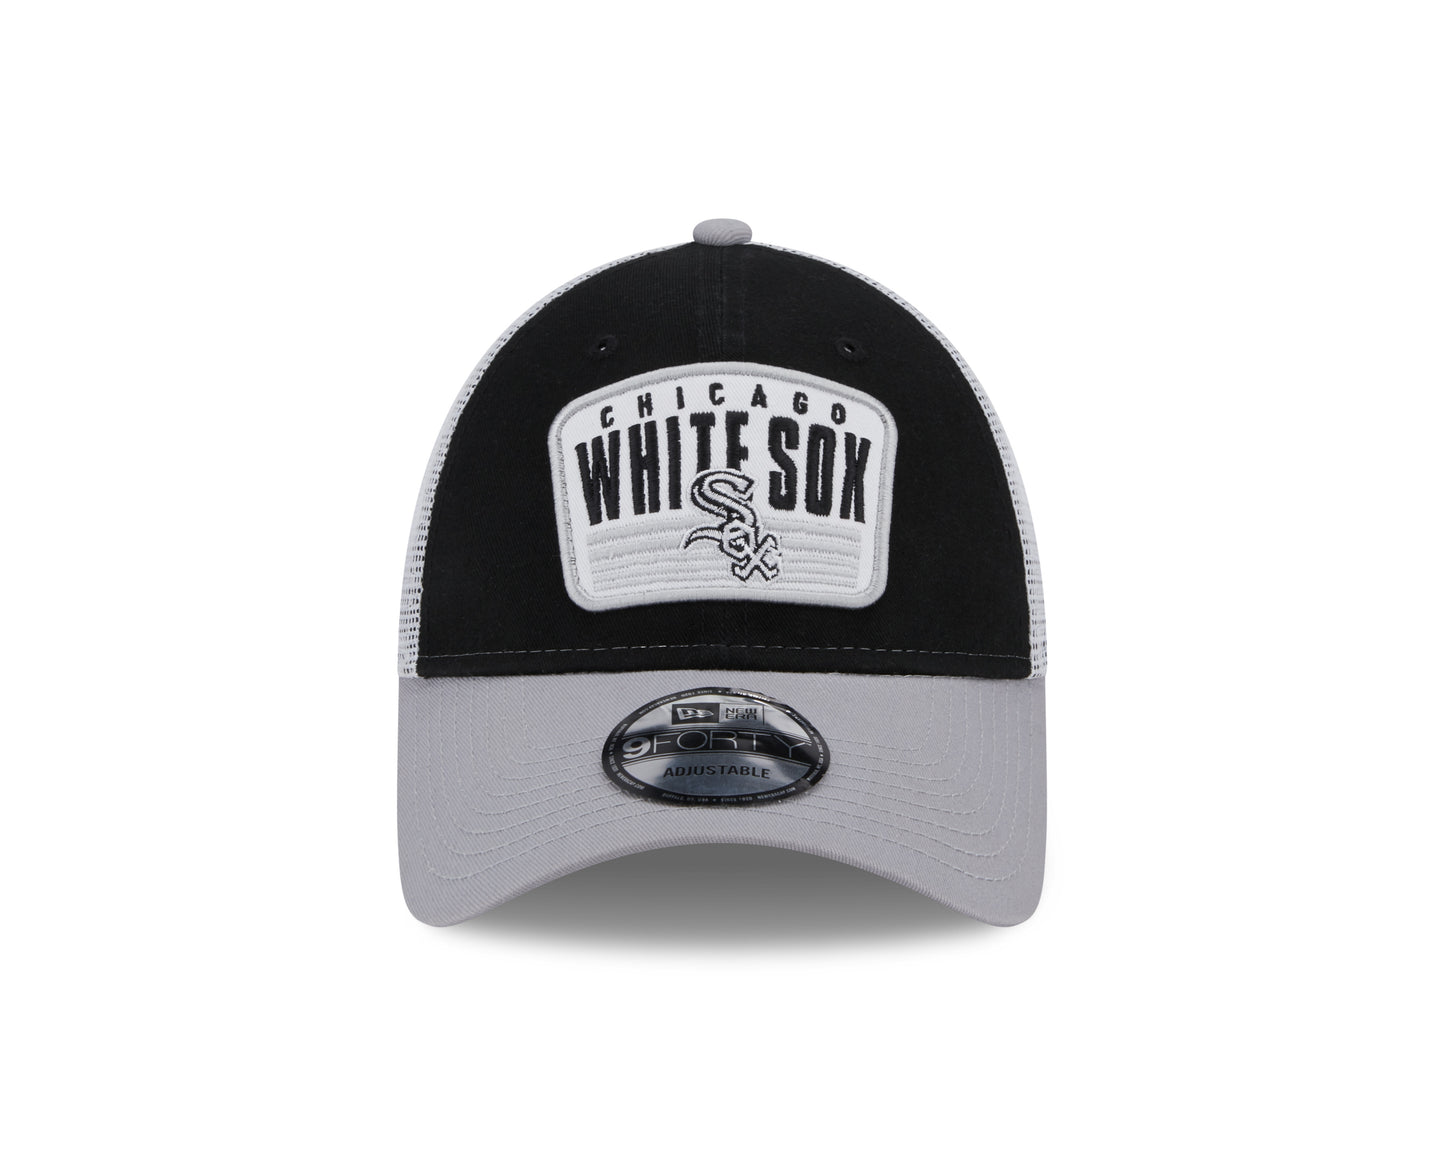 Chicago White Sox New Era 2 Tone Black/Gray Patch Trucker 9FORTY Adjustable Hat